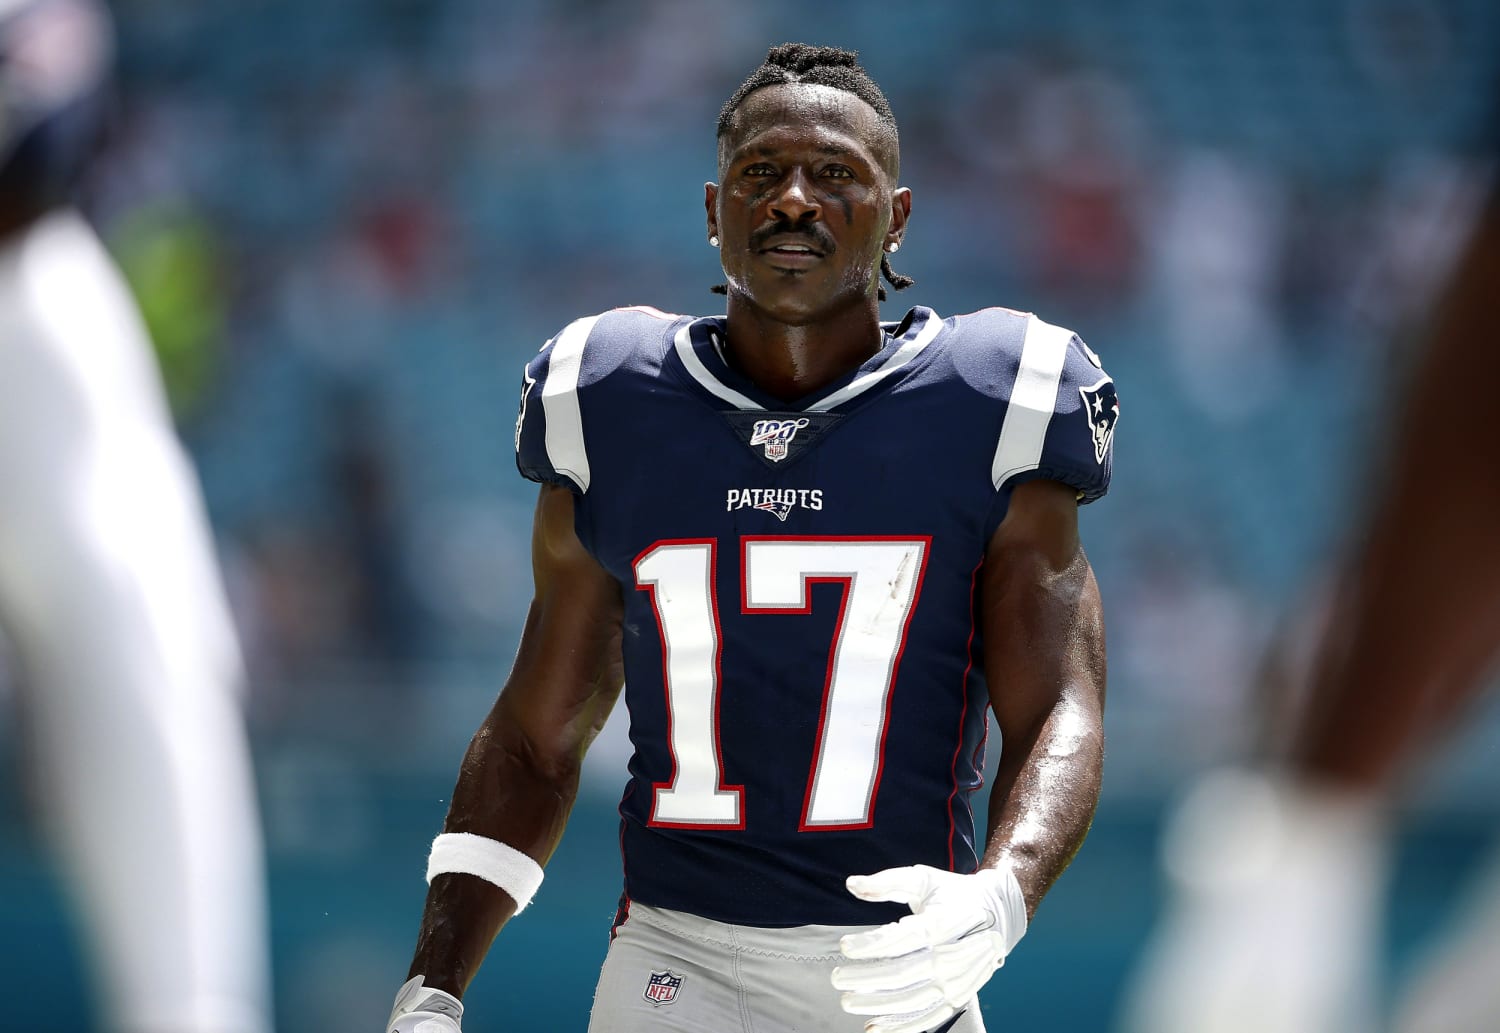 Patriots Cut Antonio Brown As The Star S Talent No Longer Hides His Red Flags